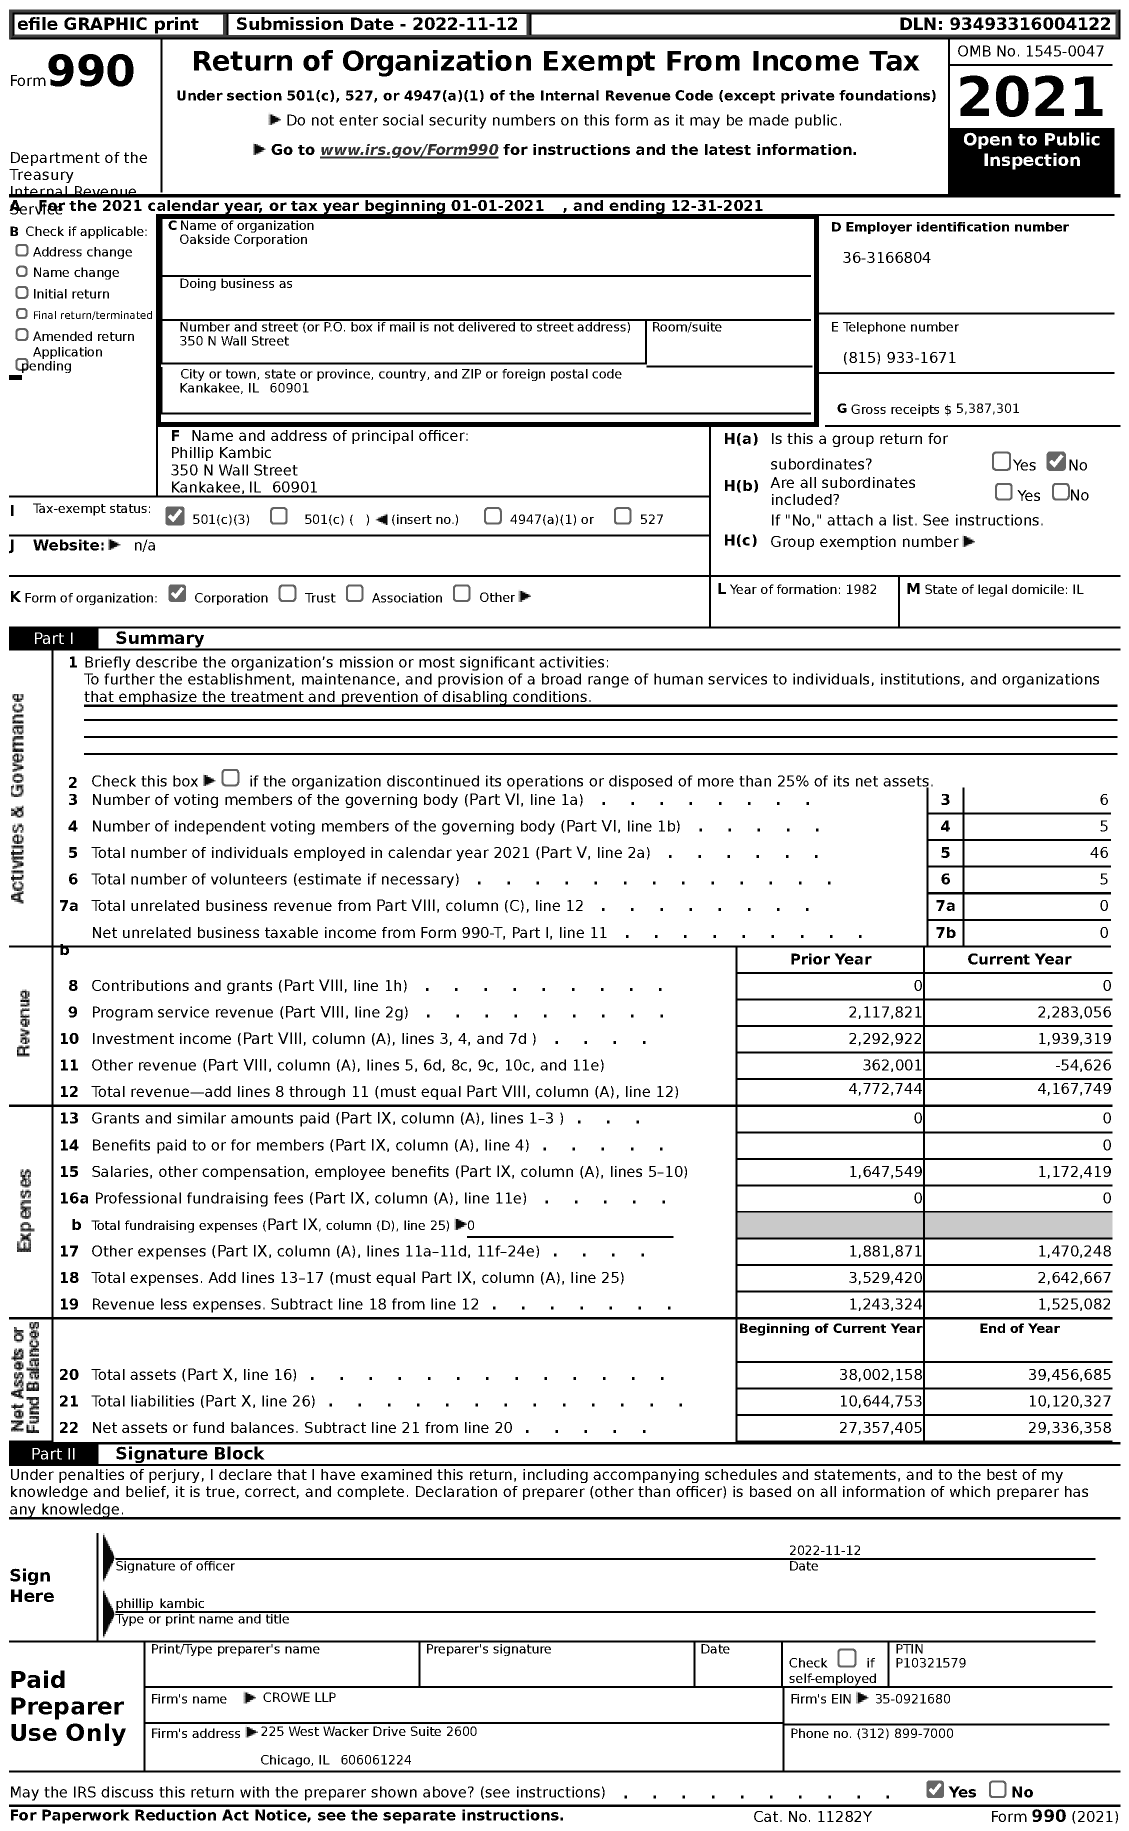 Image of first page of 2021 Form 990 for Oakside Corporation